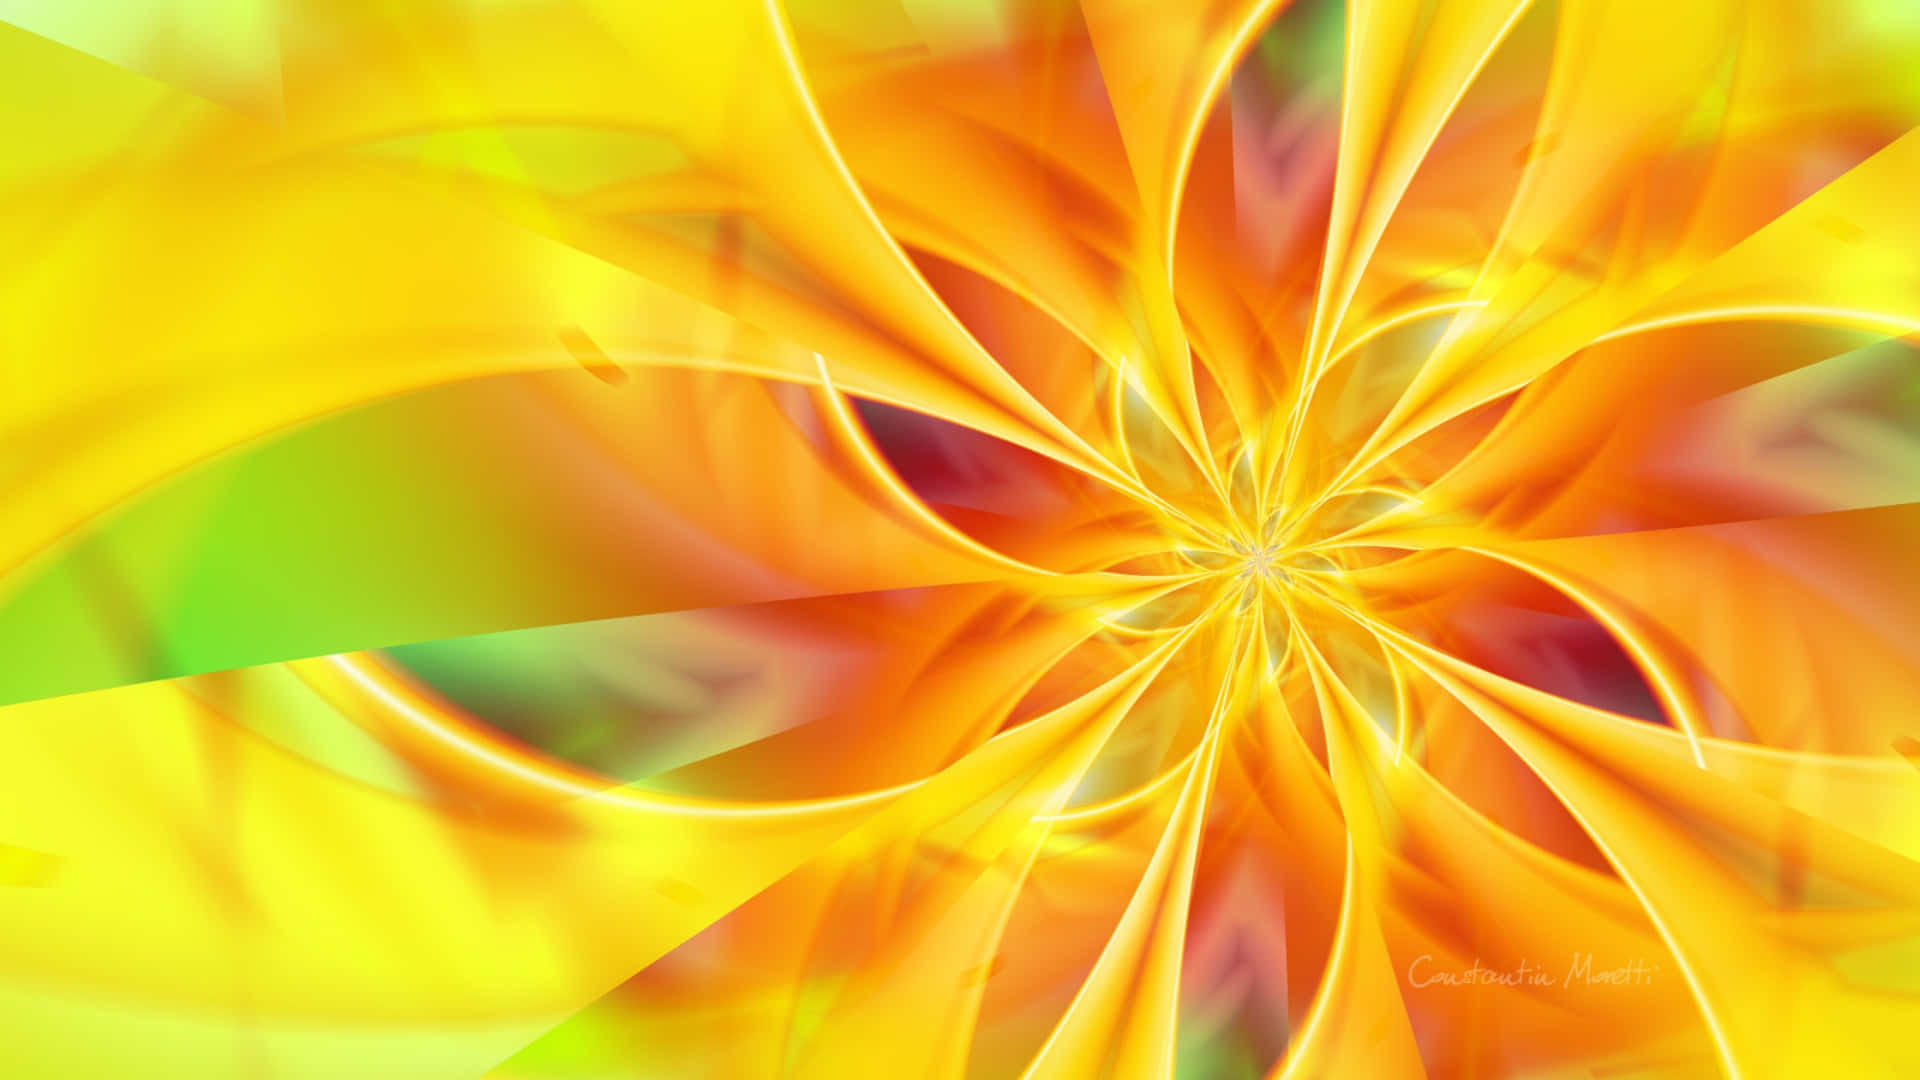 abstract yellow backgrounds